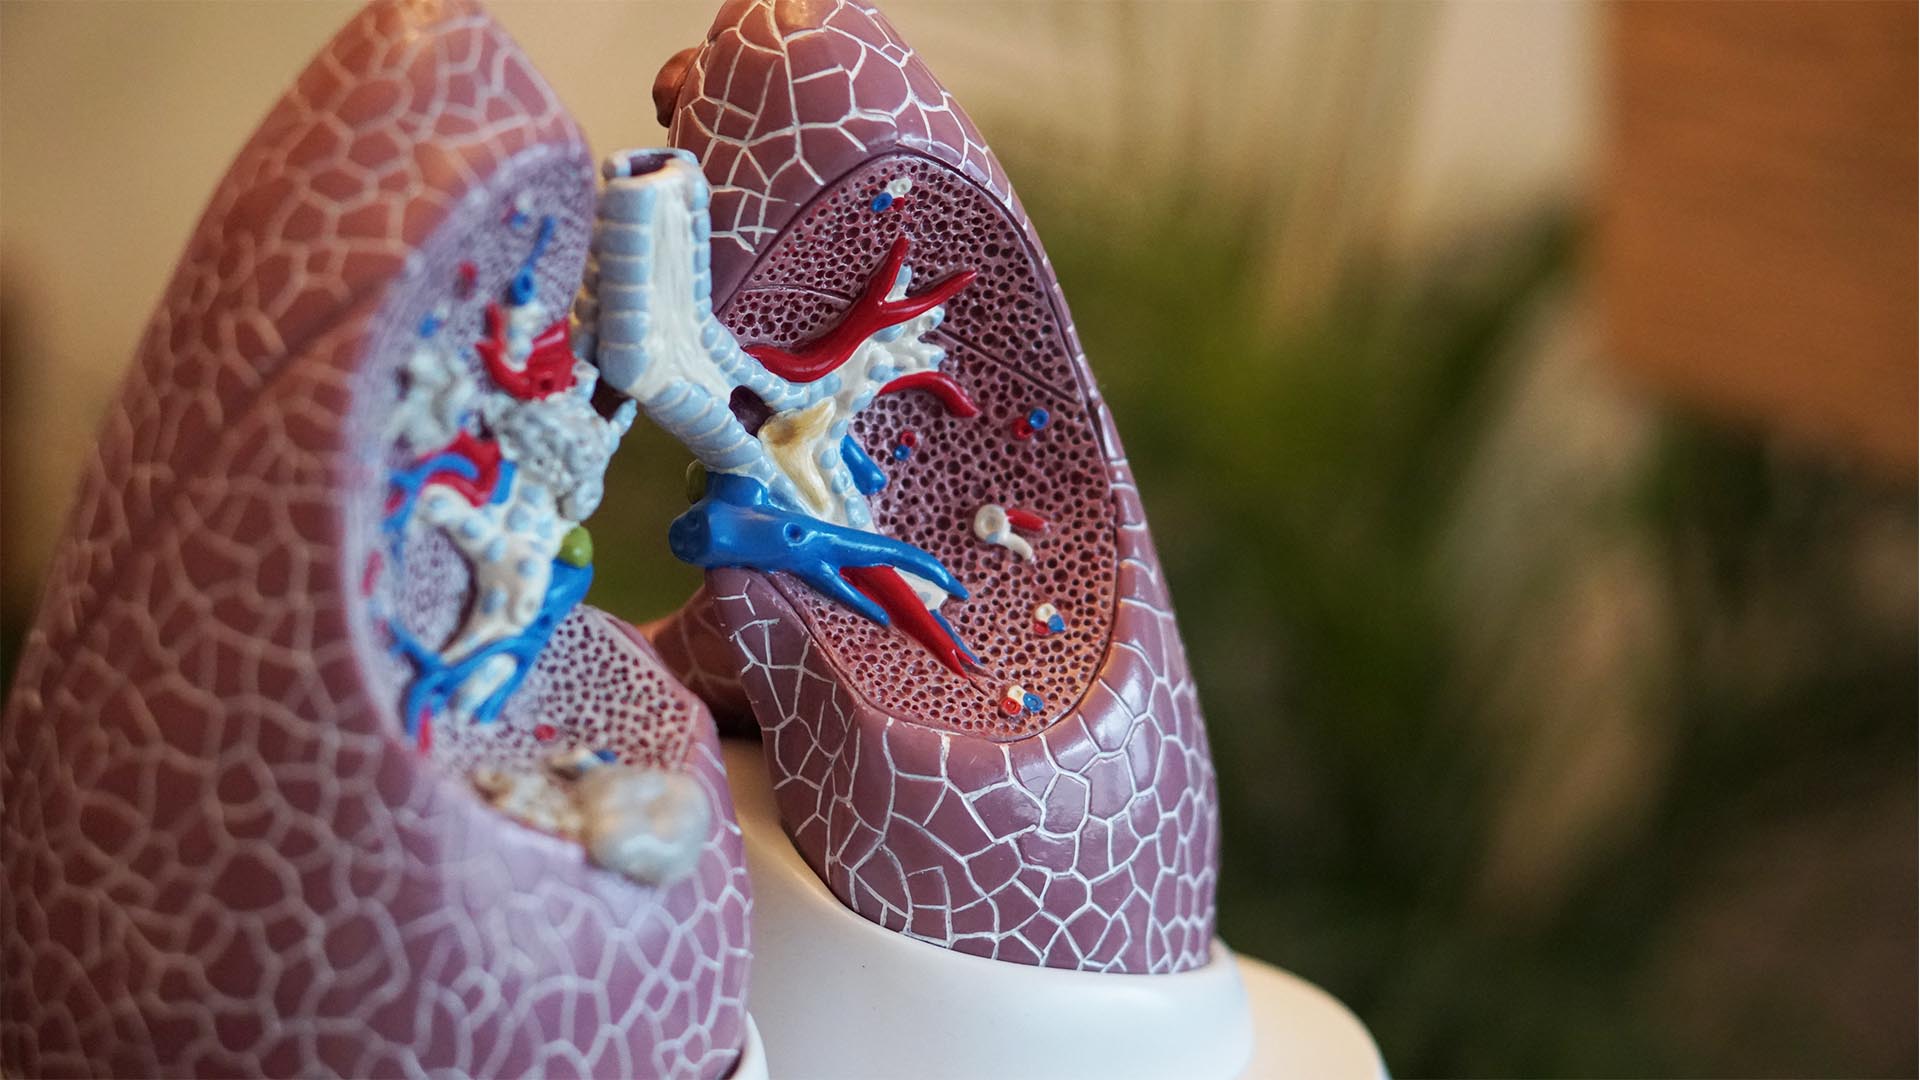 medical model of lungs